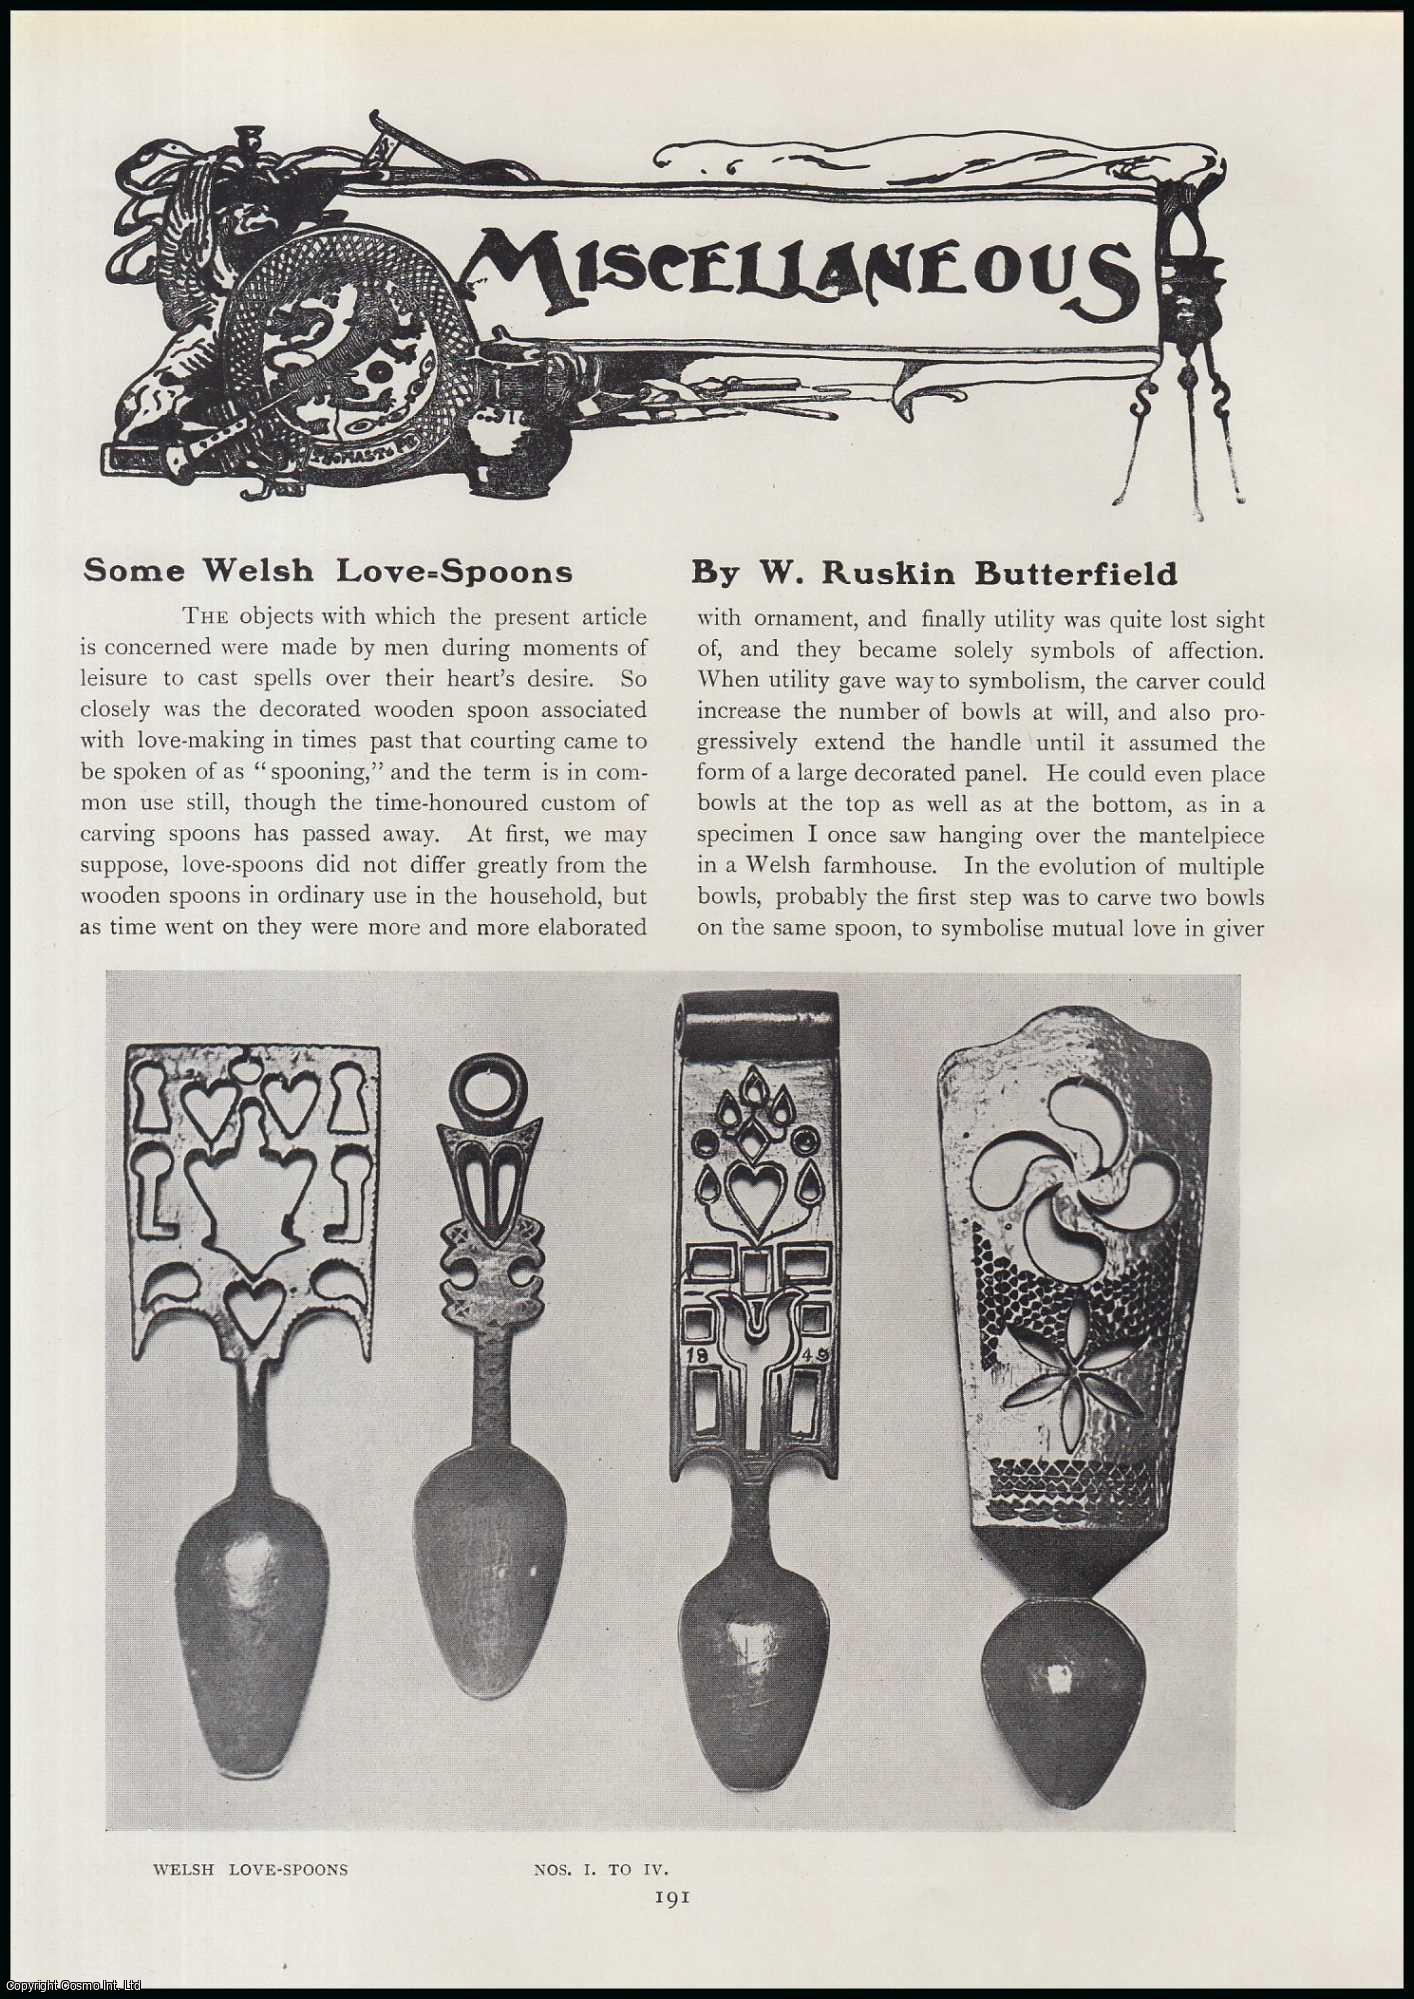 W. Ruskin Butterfield - Some Welsh Love-Spoons. An original article from The Connoisseur, 1918.